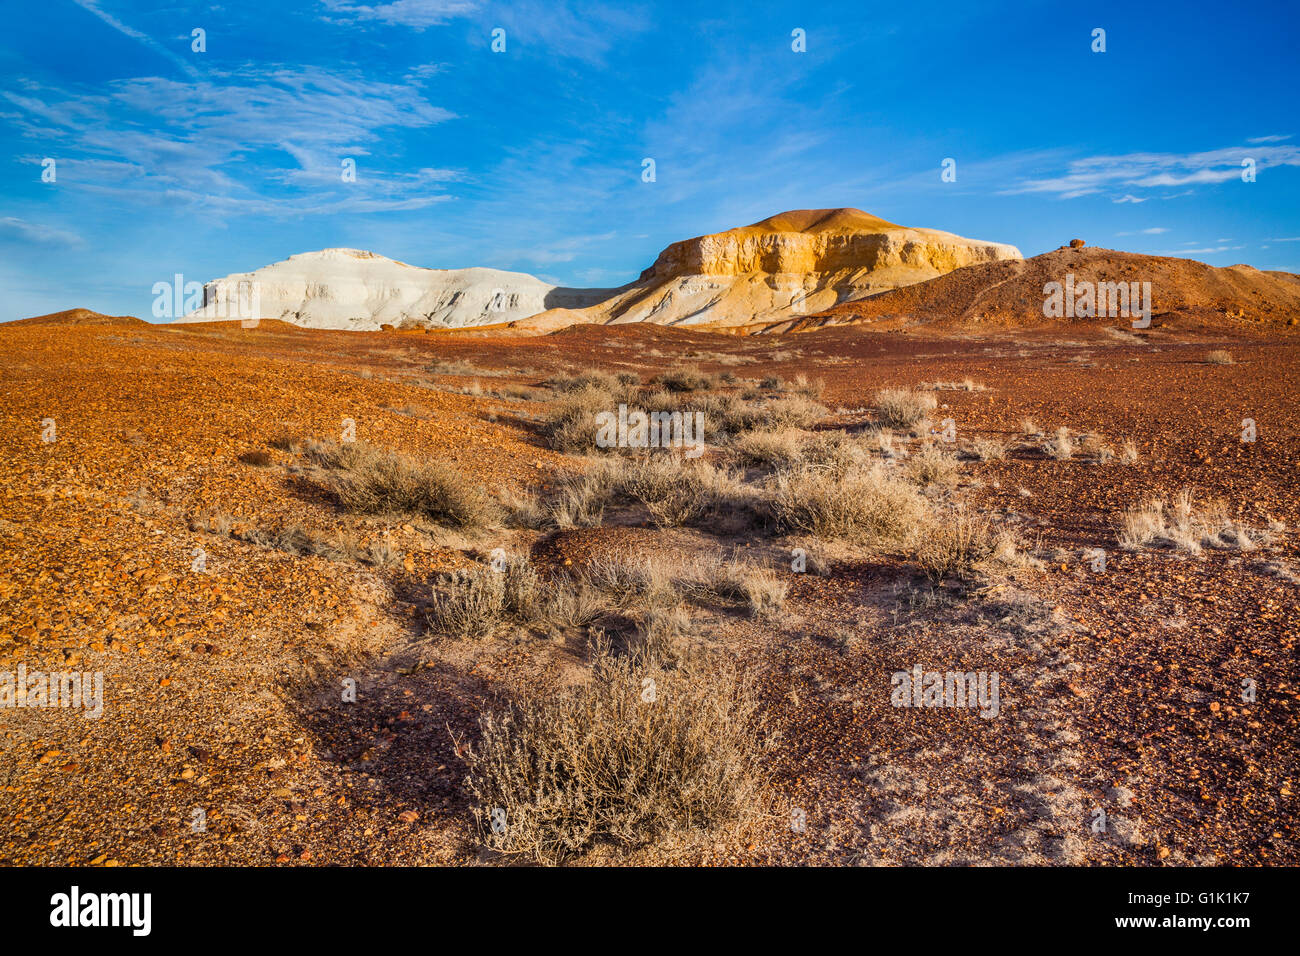 The Breakaways Reserve near Coober Pedy, South Australia. Colourful landscape with flat-topped mesas to stony gibber desert Stock Photo